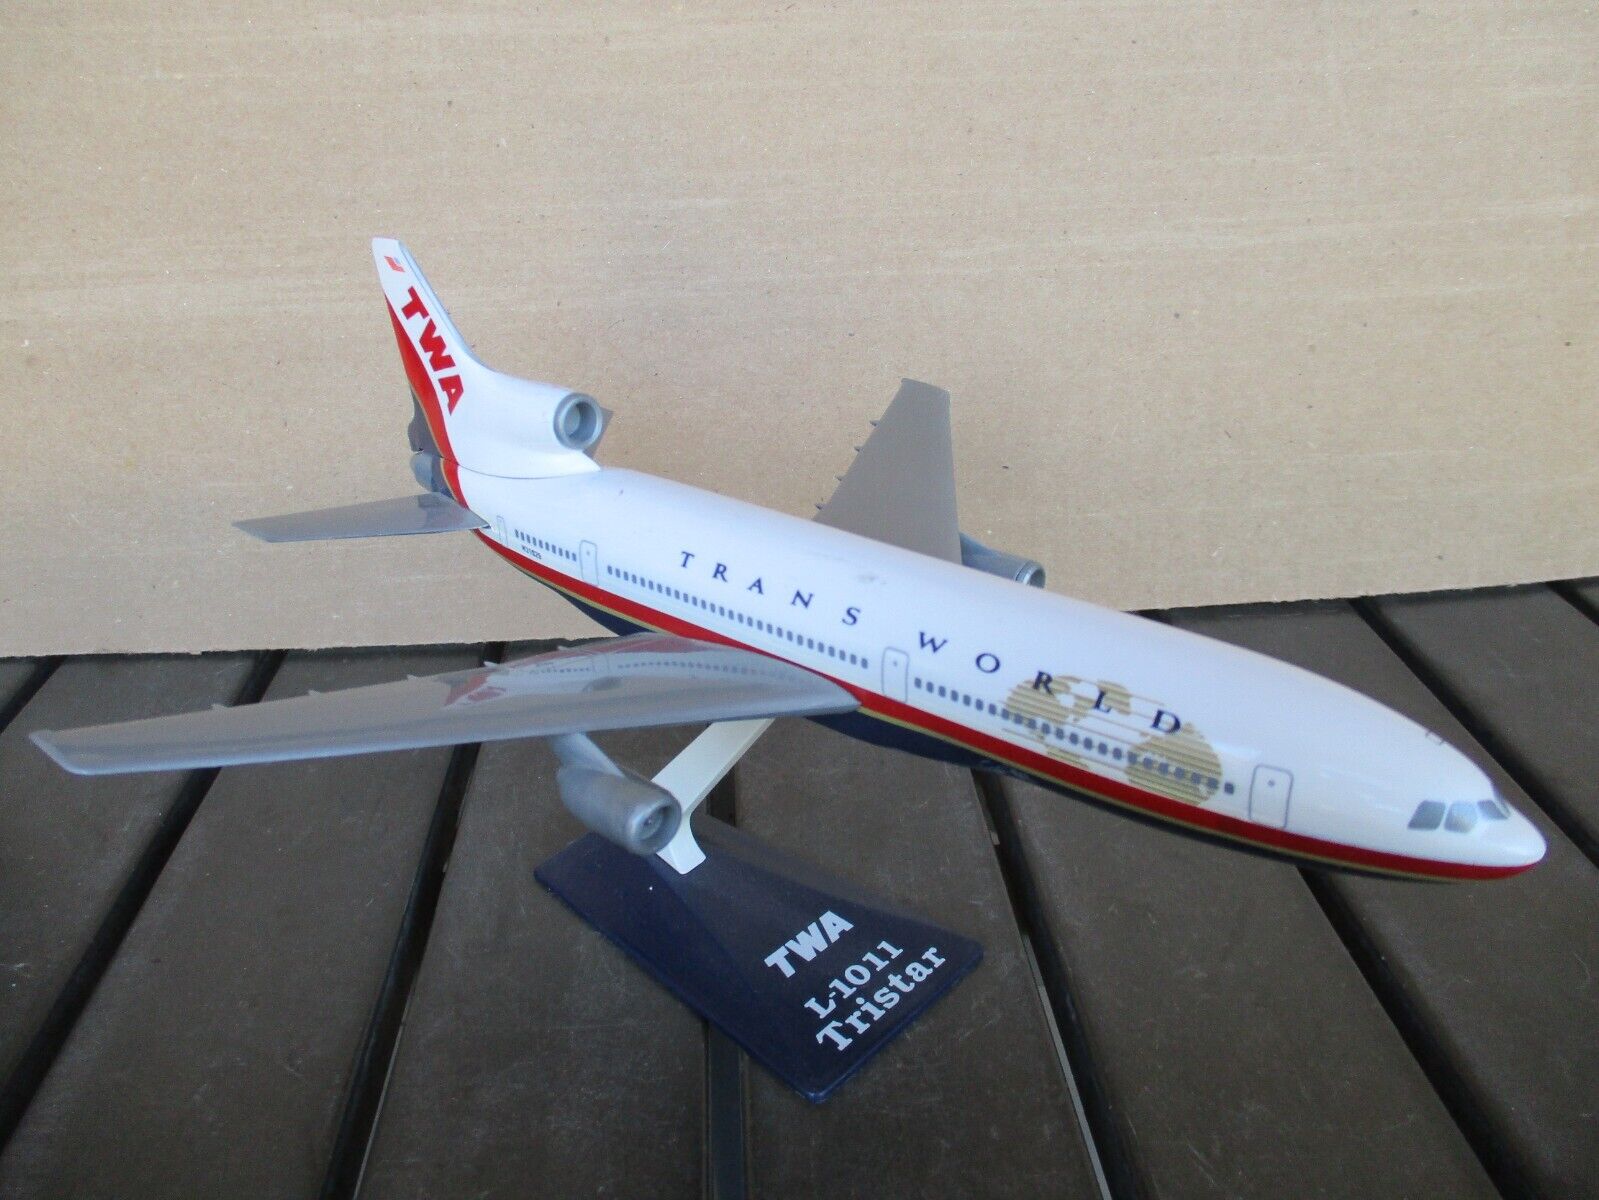 Twa L-1011 Tristar Airline Airplane Desk Model With Stand